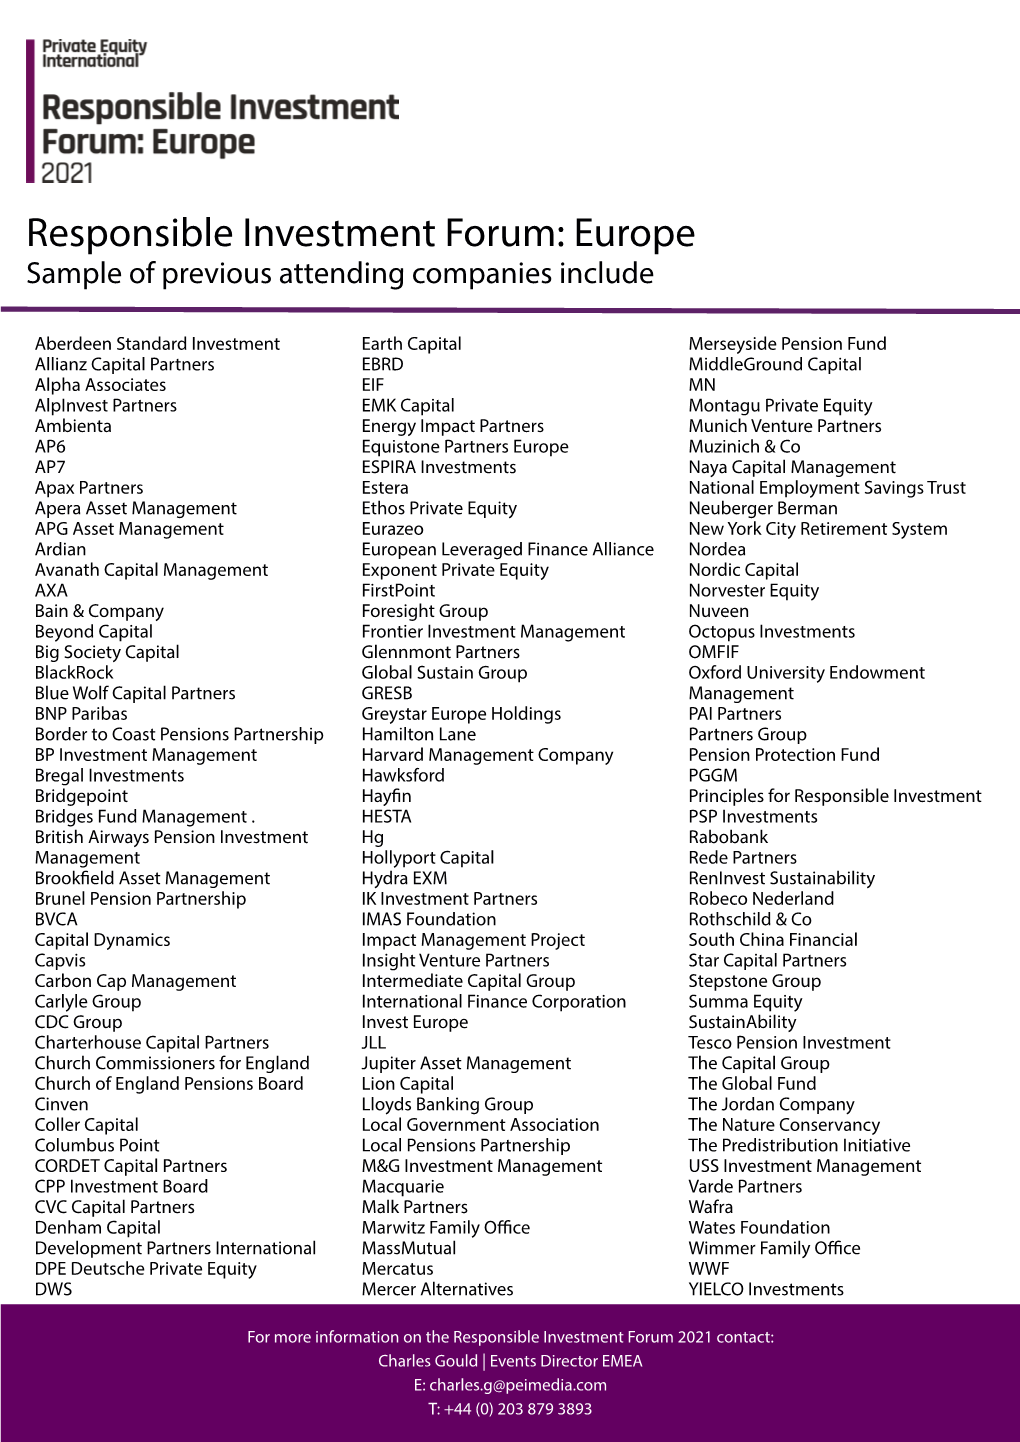 Responsible Investment Forum: Europe Sample of Previous Attending Companies Include